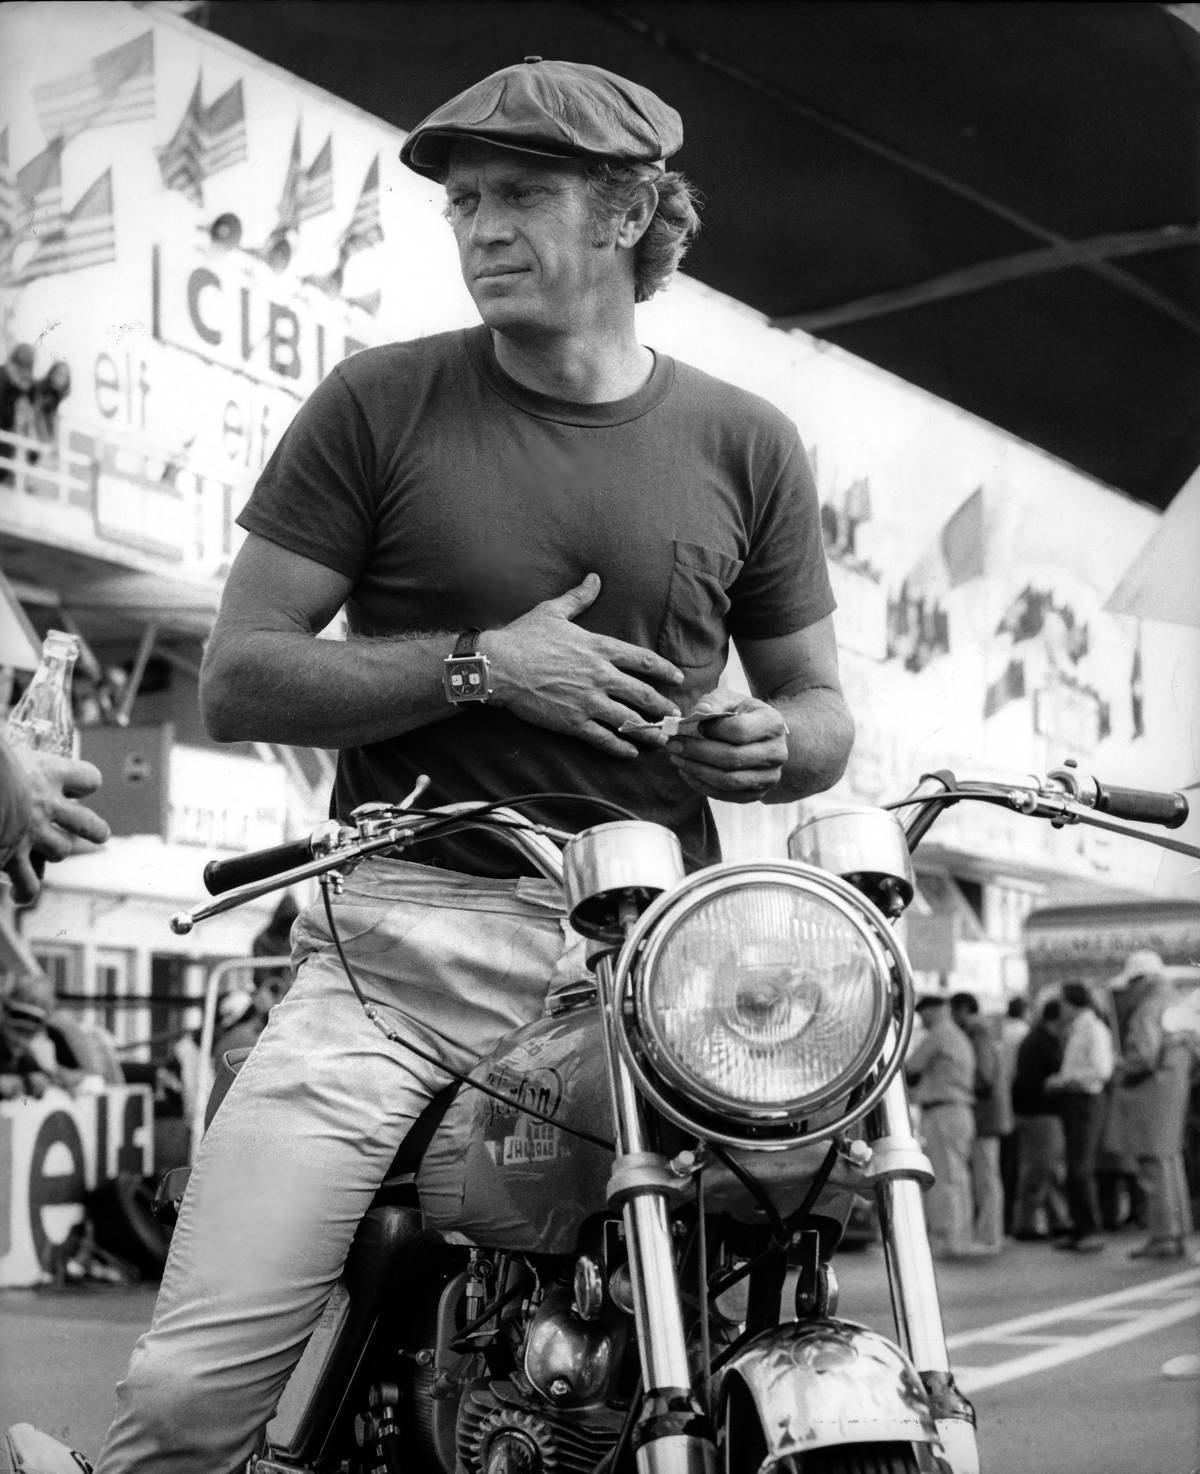 o_STEVE_MCQUEEN_The_KING_OF_COOL_on_a_MOTORCYCLE_z.jpg